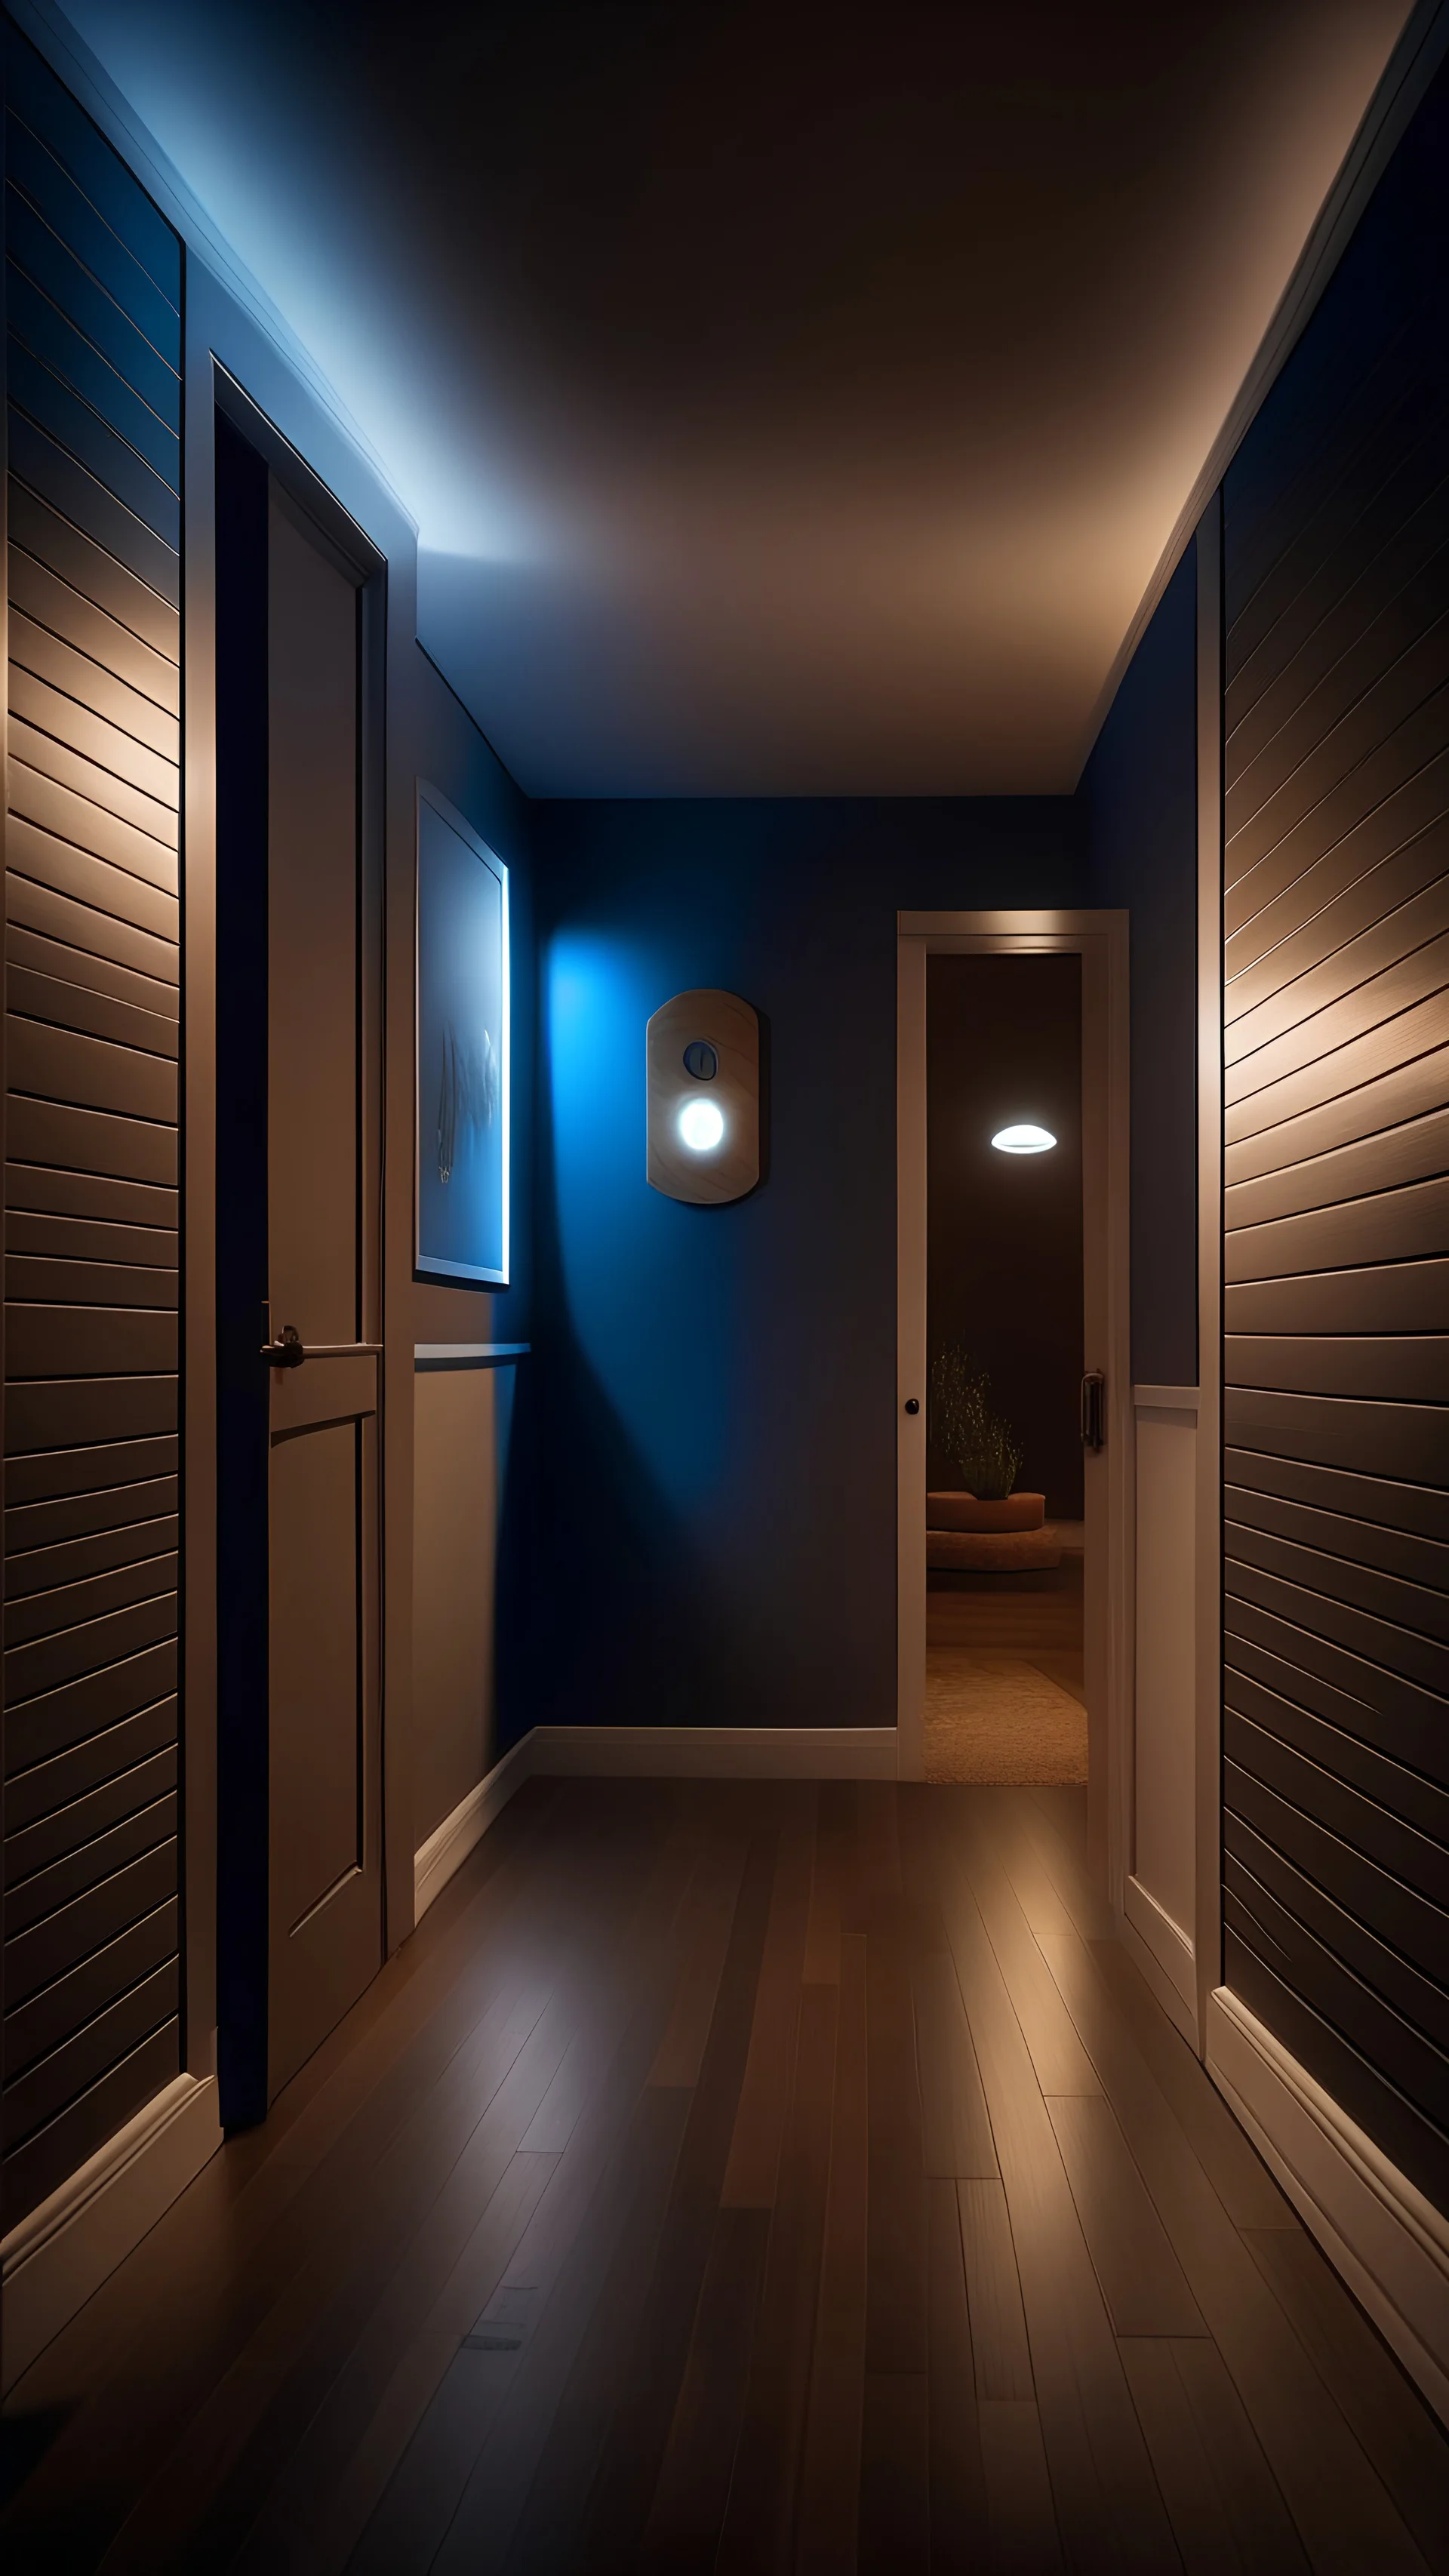 Create an image of a hallway or room with motion-activated lights, capturing the moment when the lights turn on as someone enters the space.